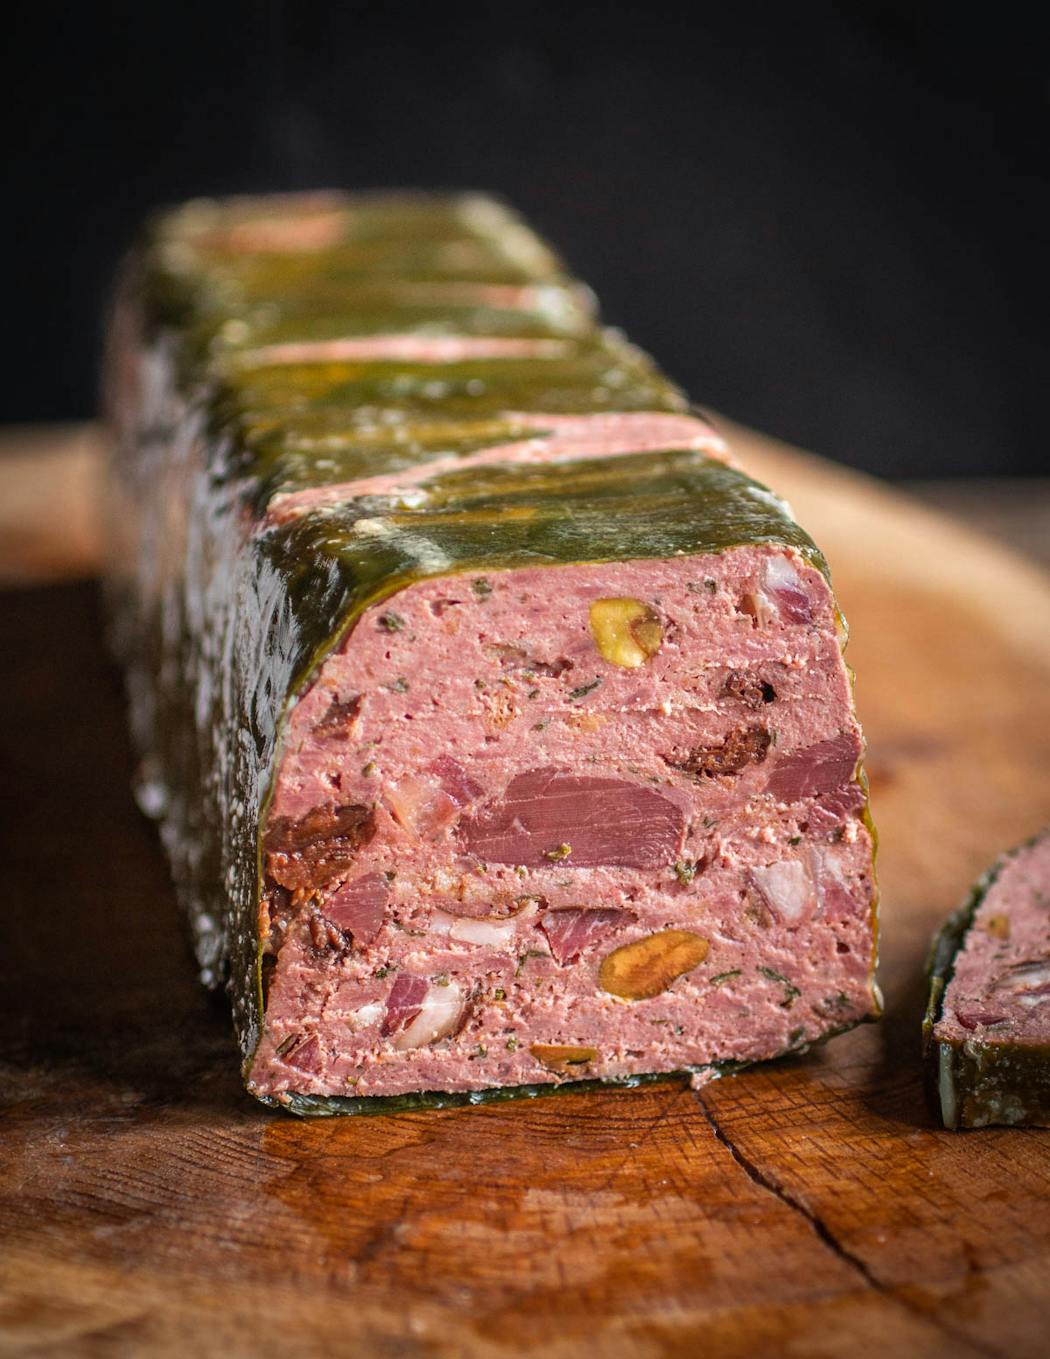 Another of Alan Bergo’s roadkill creations: a terrine incorporating venison organ meats and pigeon breasts. 